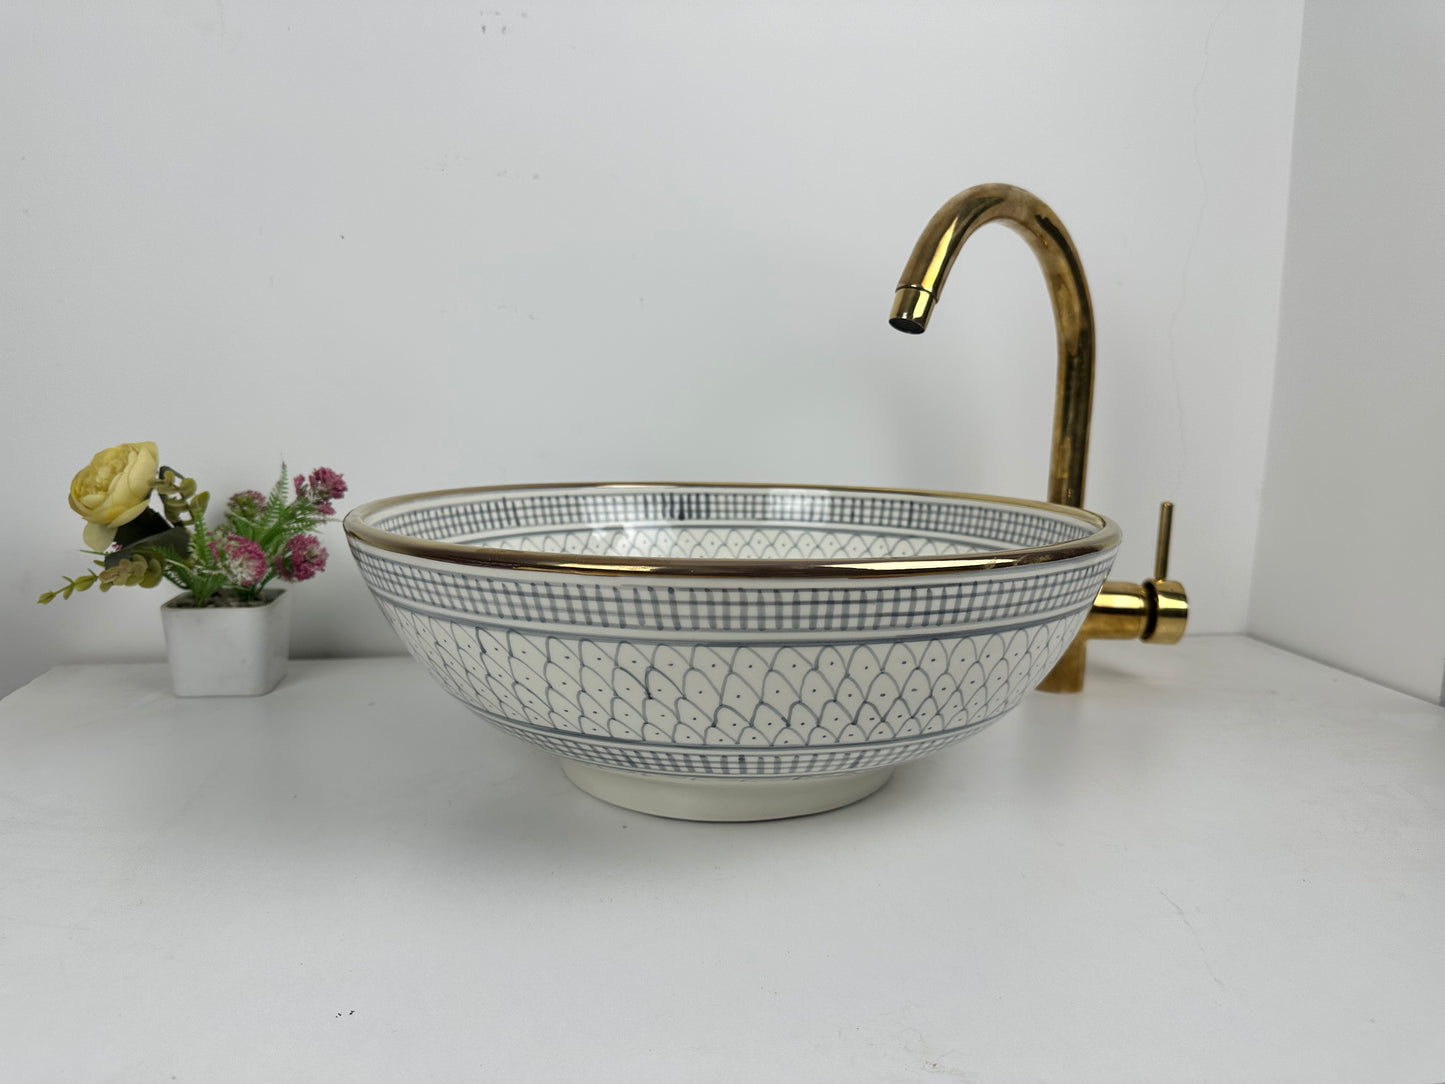 Cloud Mist: Handcrafted Ceramic Sink in Soft gray Color with 14K gold